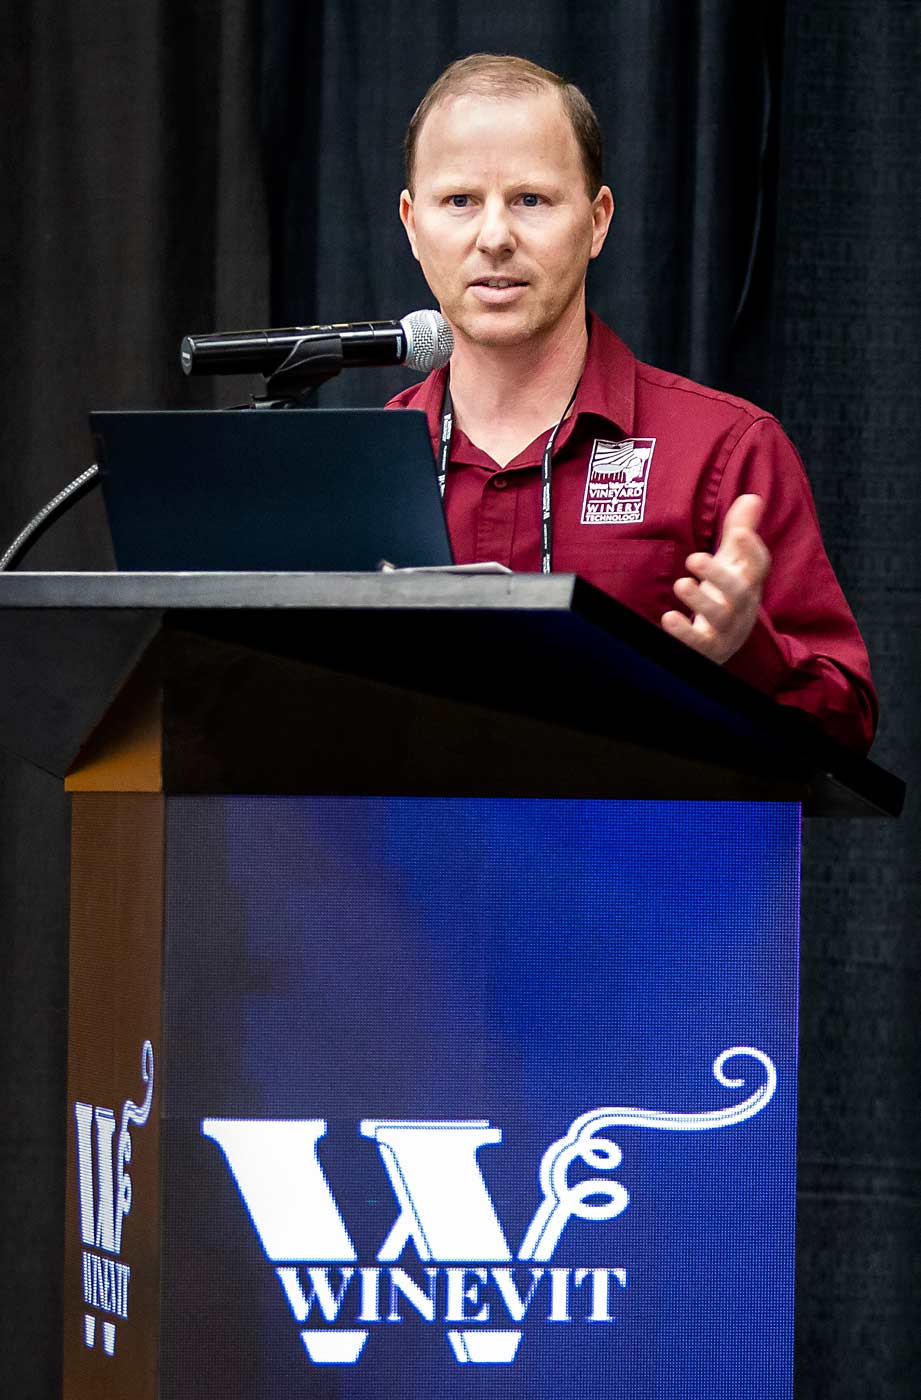 Trent Ball, a Yakima Valley College professor, discusses the wine industry’s updated cost-of-production calculator in February at the WineVit conference in Kennewick, Washington.(Ross Courtney/Good Fruit Grower)